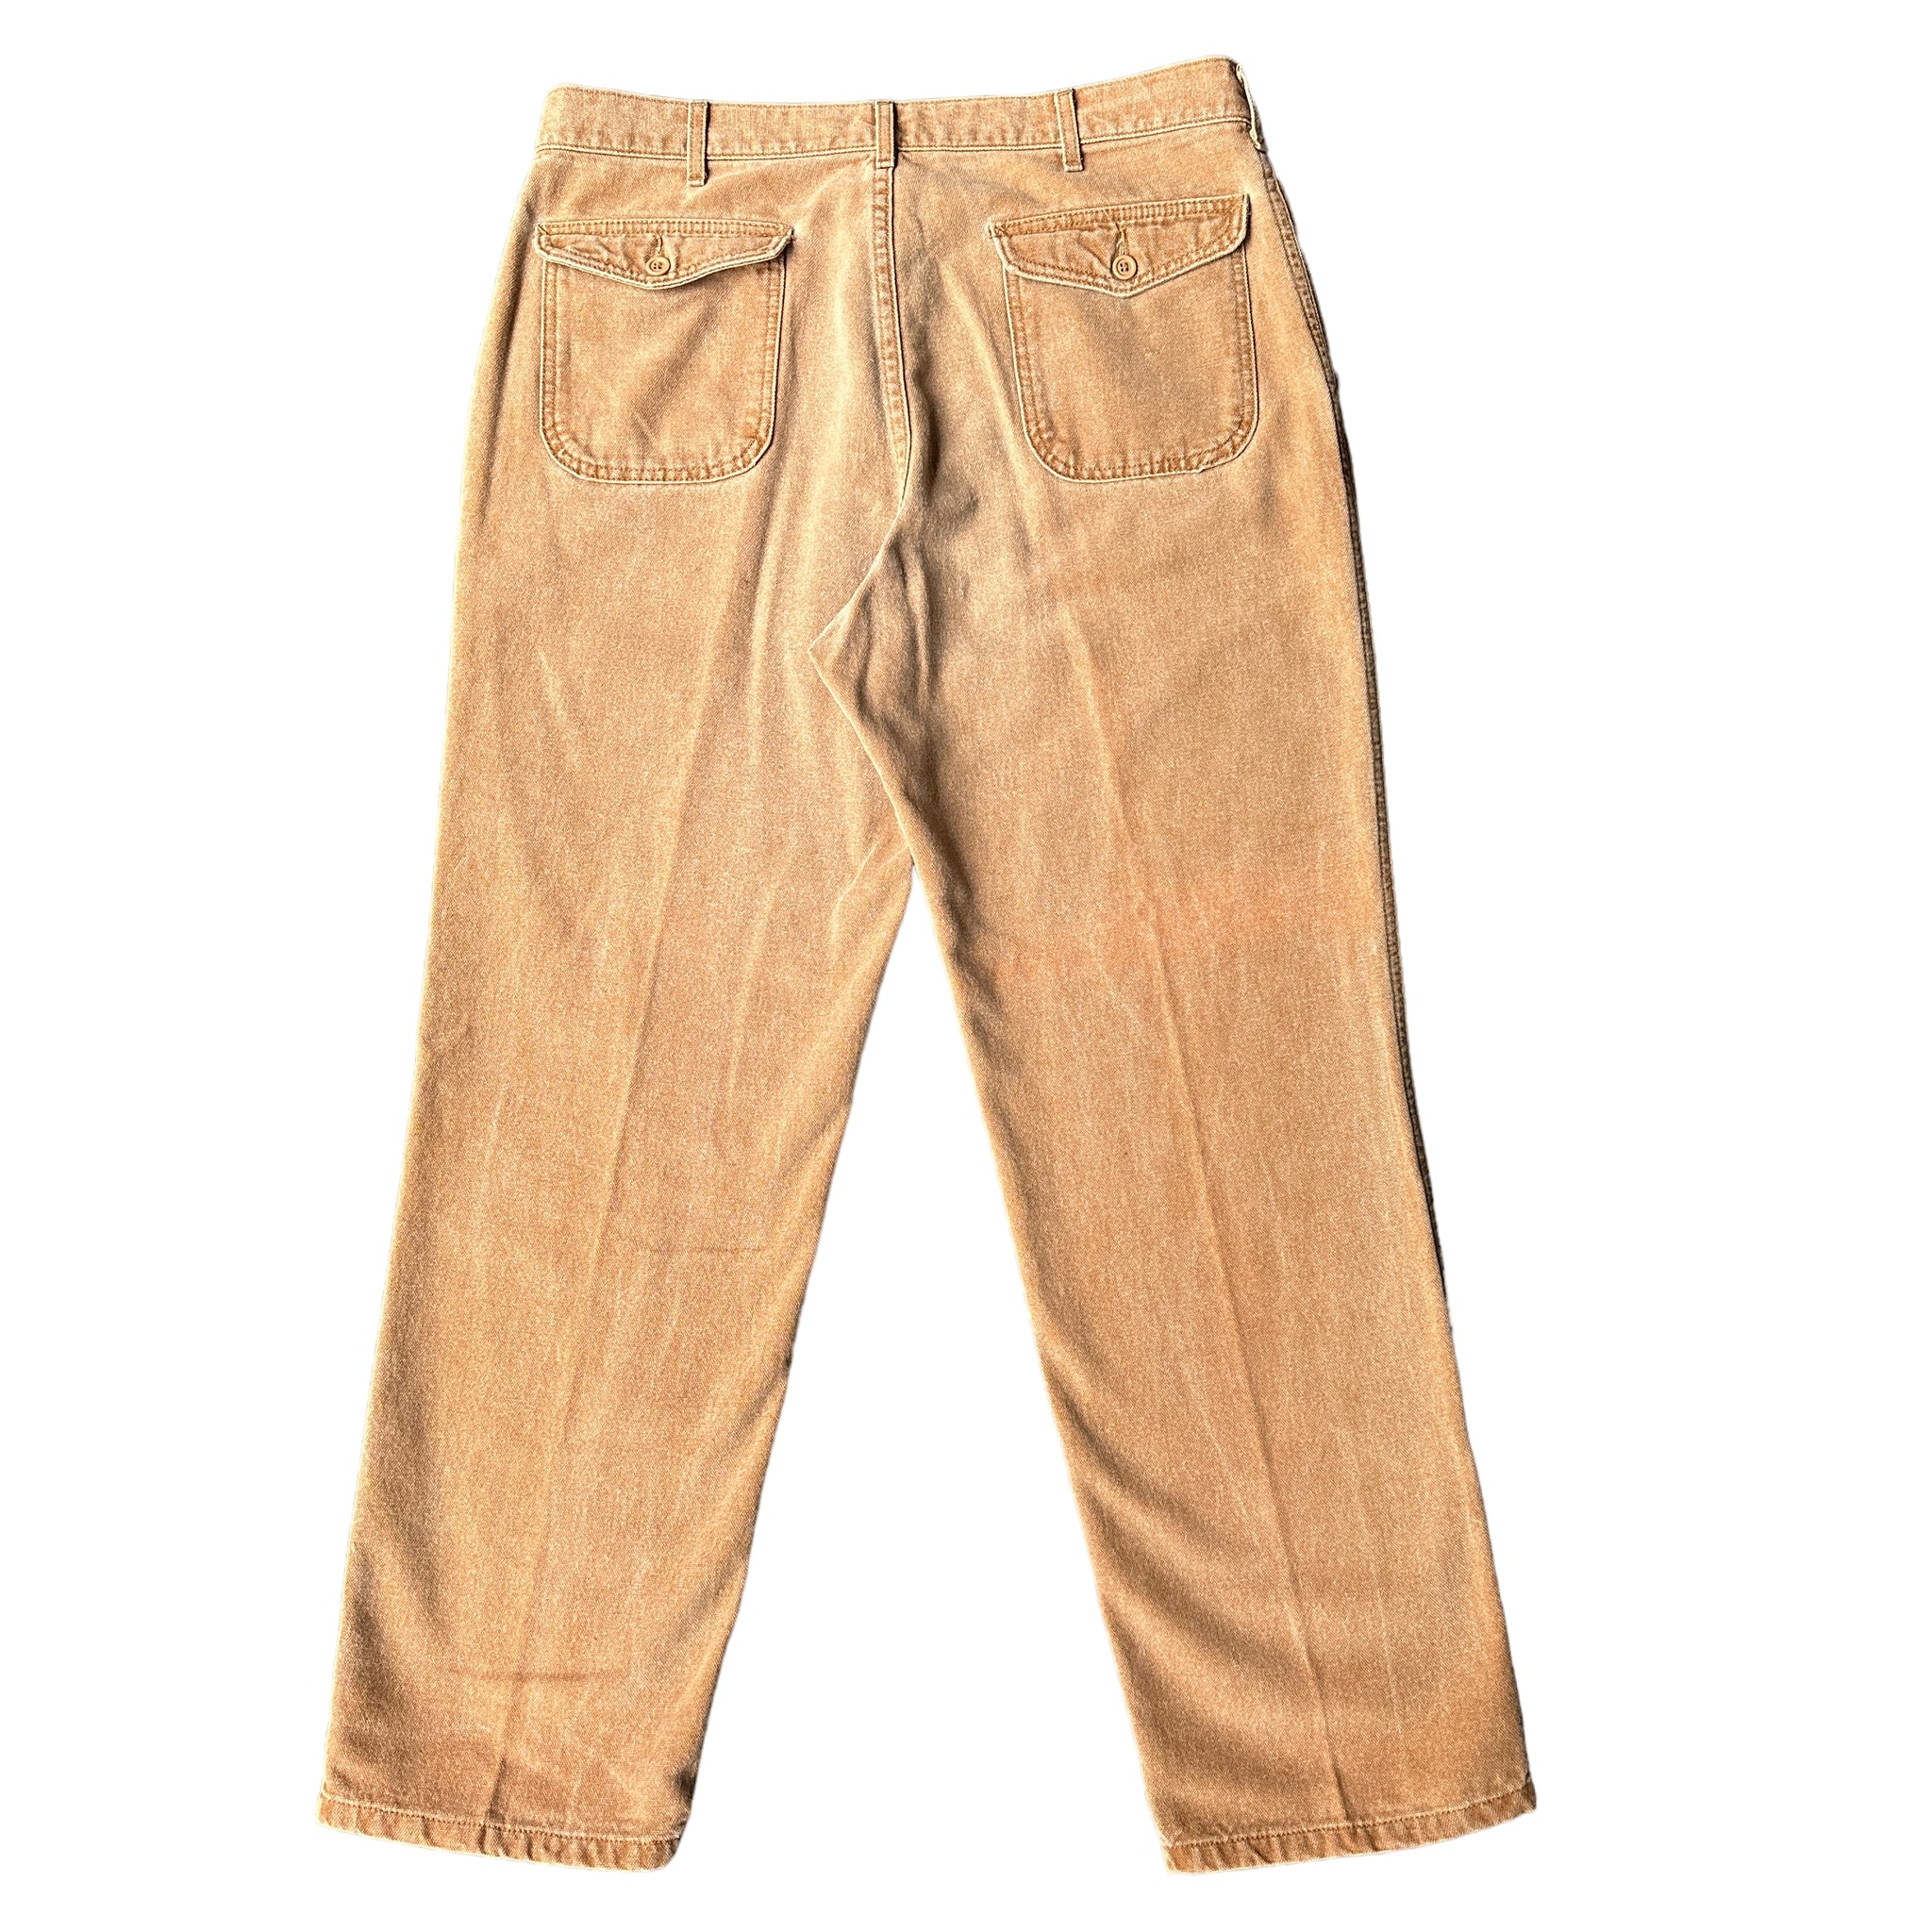 Poshmark Pants, Its signature item is the iconic Swedish-inspired soft  cotton clothing, designed to last through childhood and beyond.